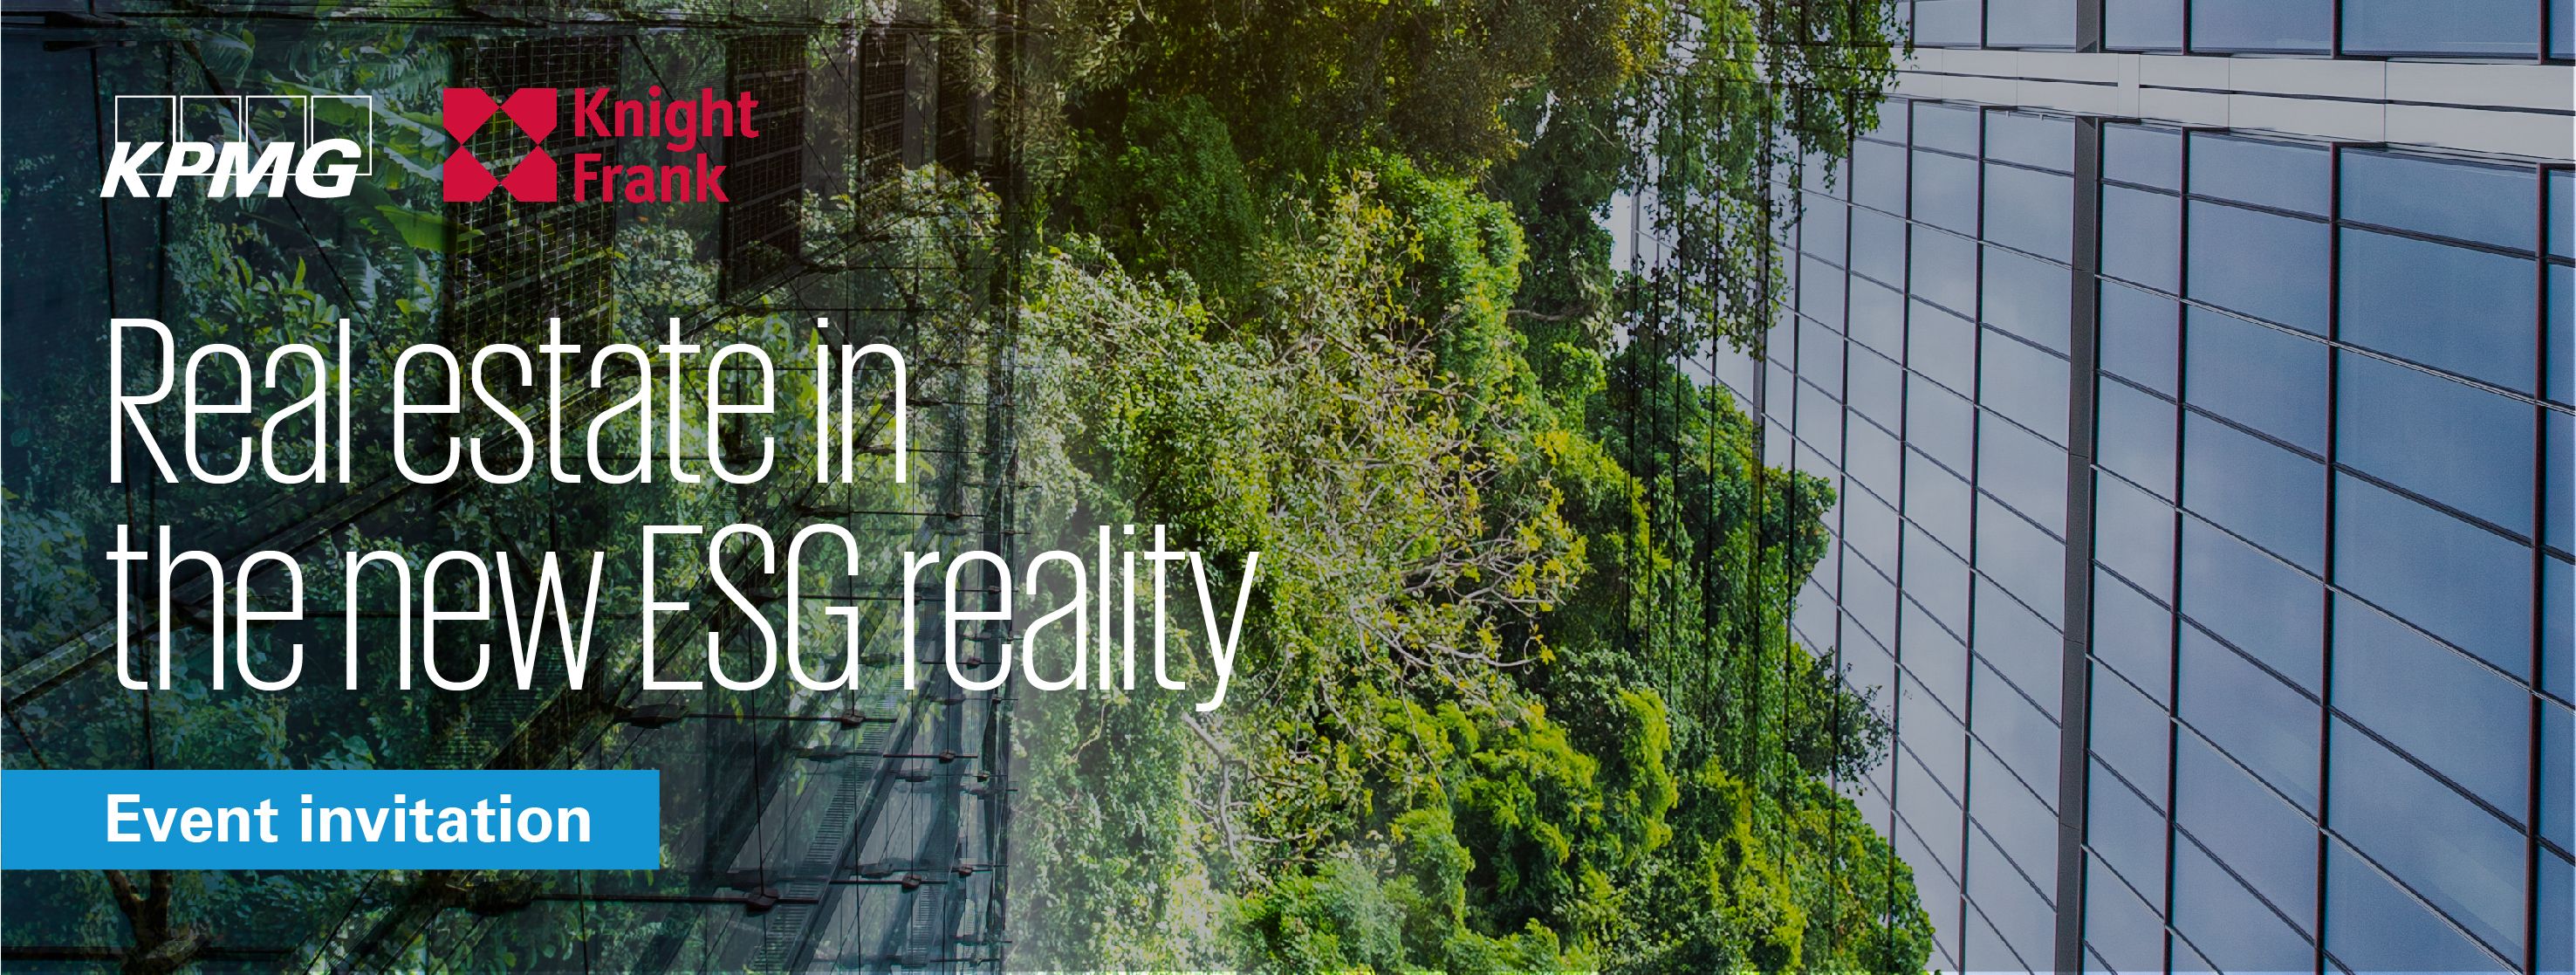 Real estate in the new ESG reality